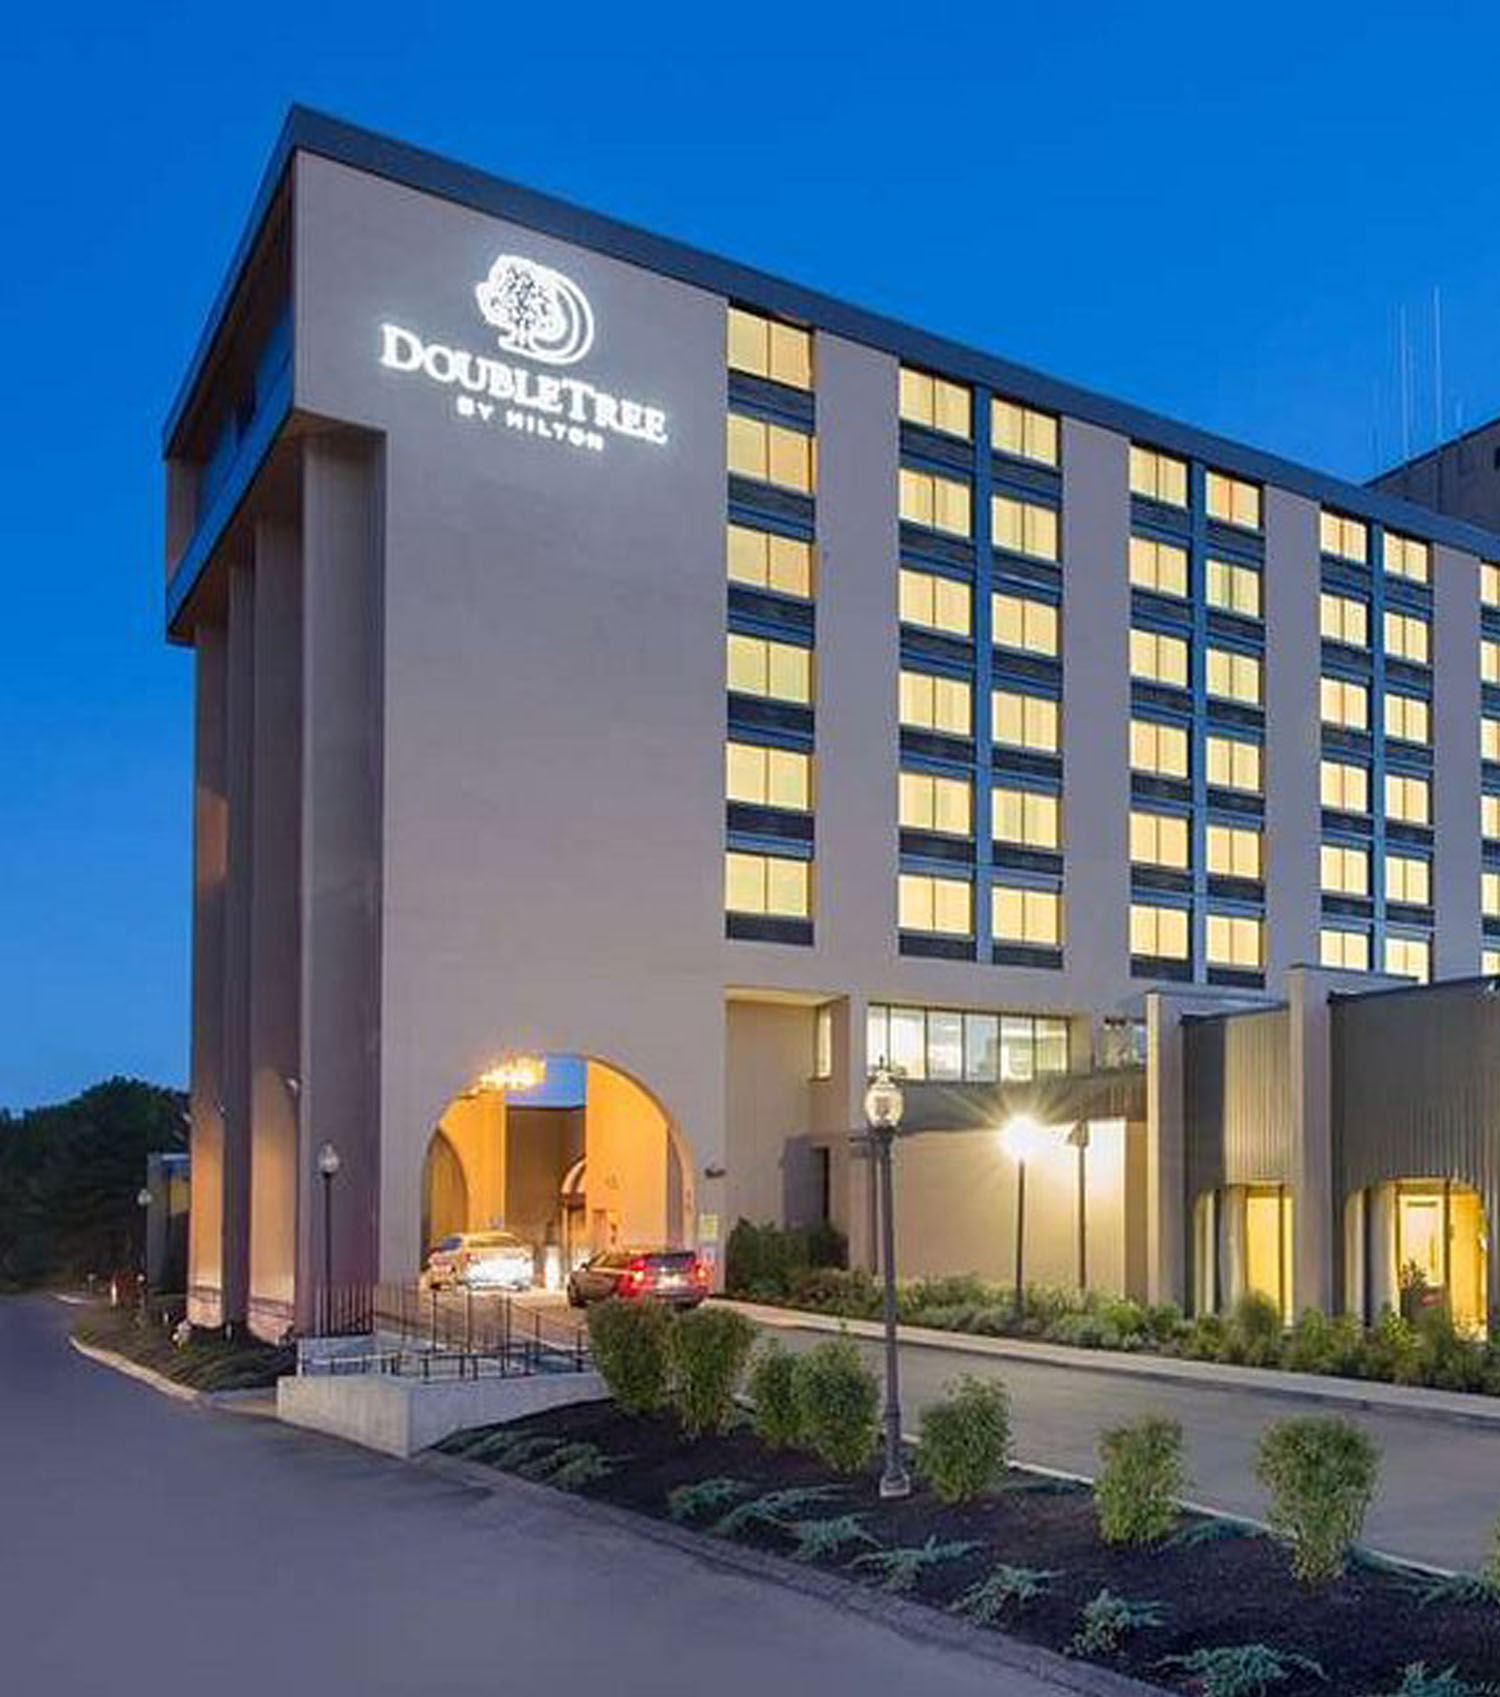 DoubleTree by Hilton exterior